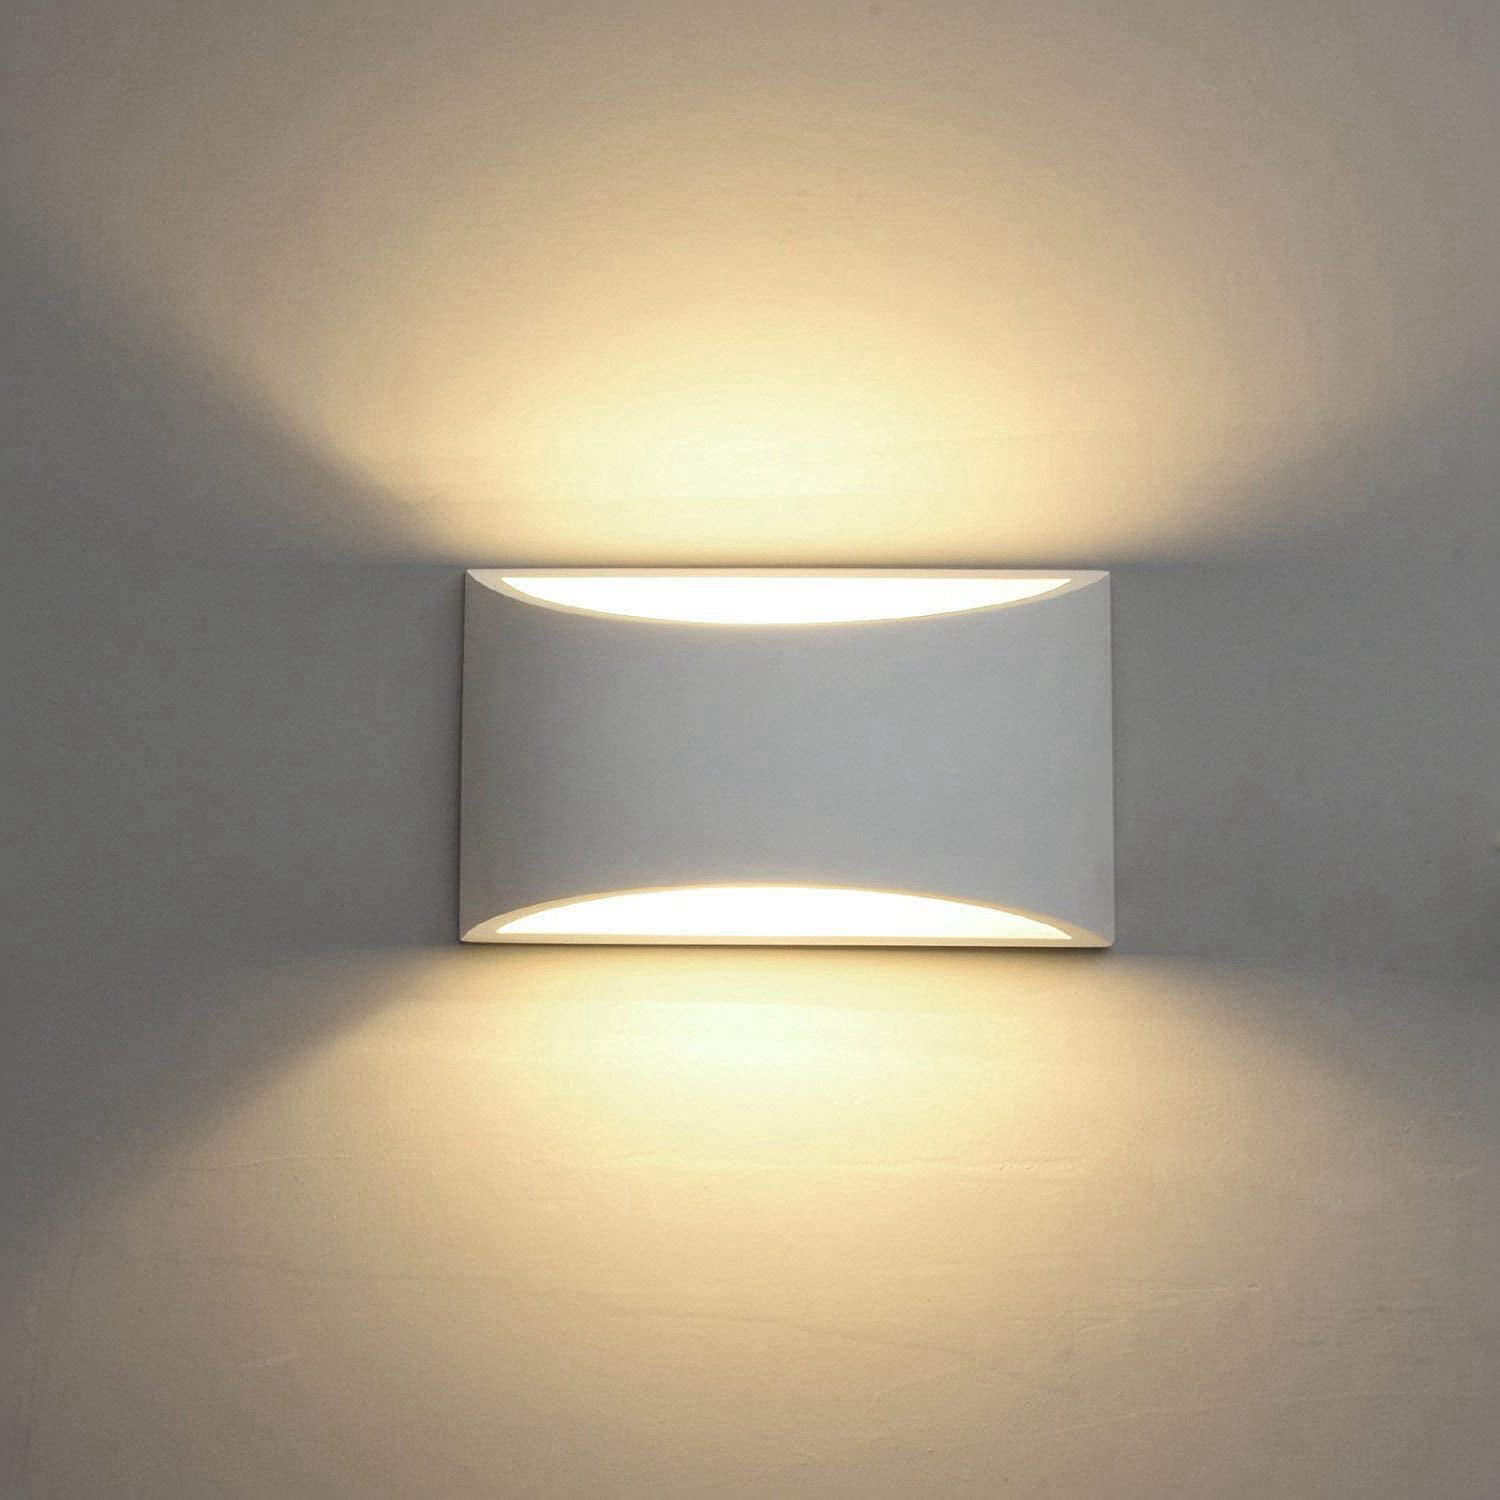 LED UP&DOWN LIGHT WALL SCONCE FOR WET LOCATIONS WARM WHITE 2000 LUMENS 